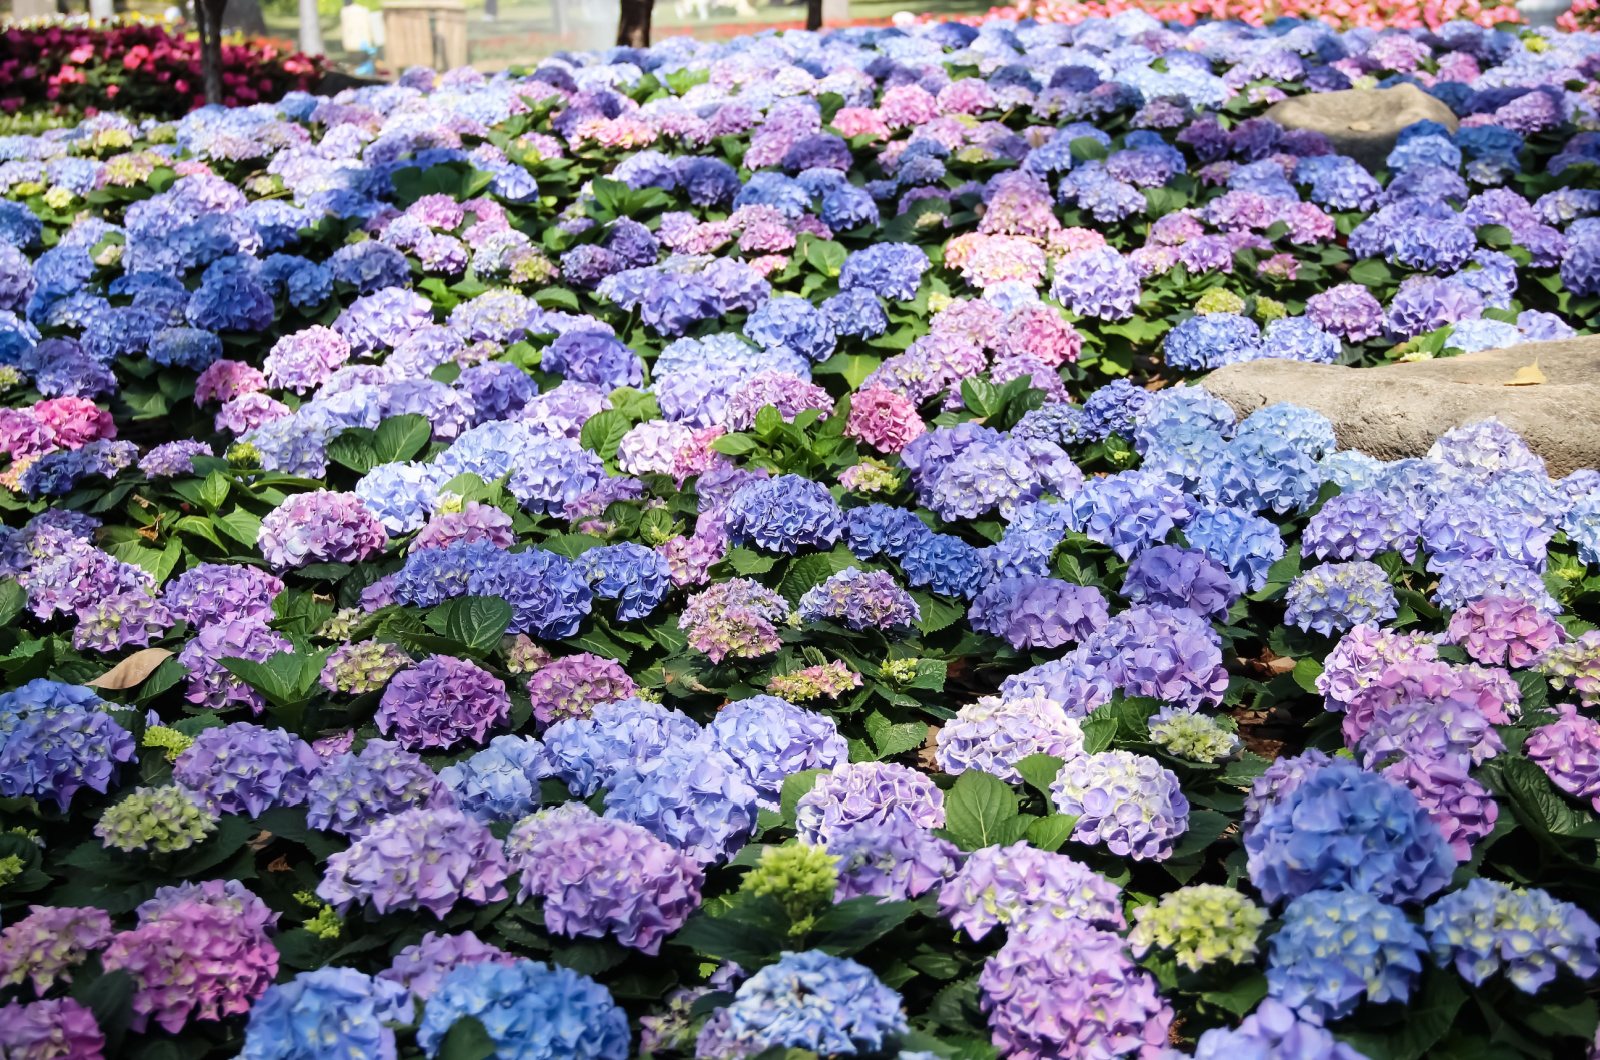 Large number of Hydrangea